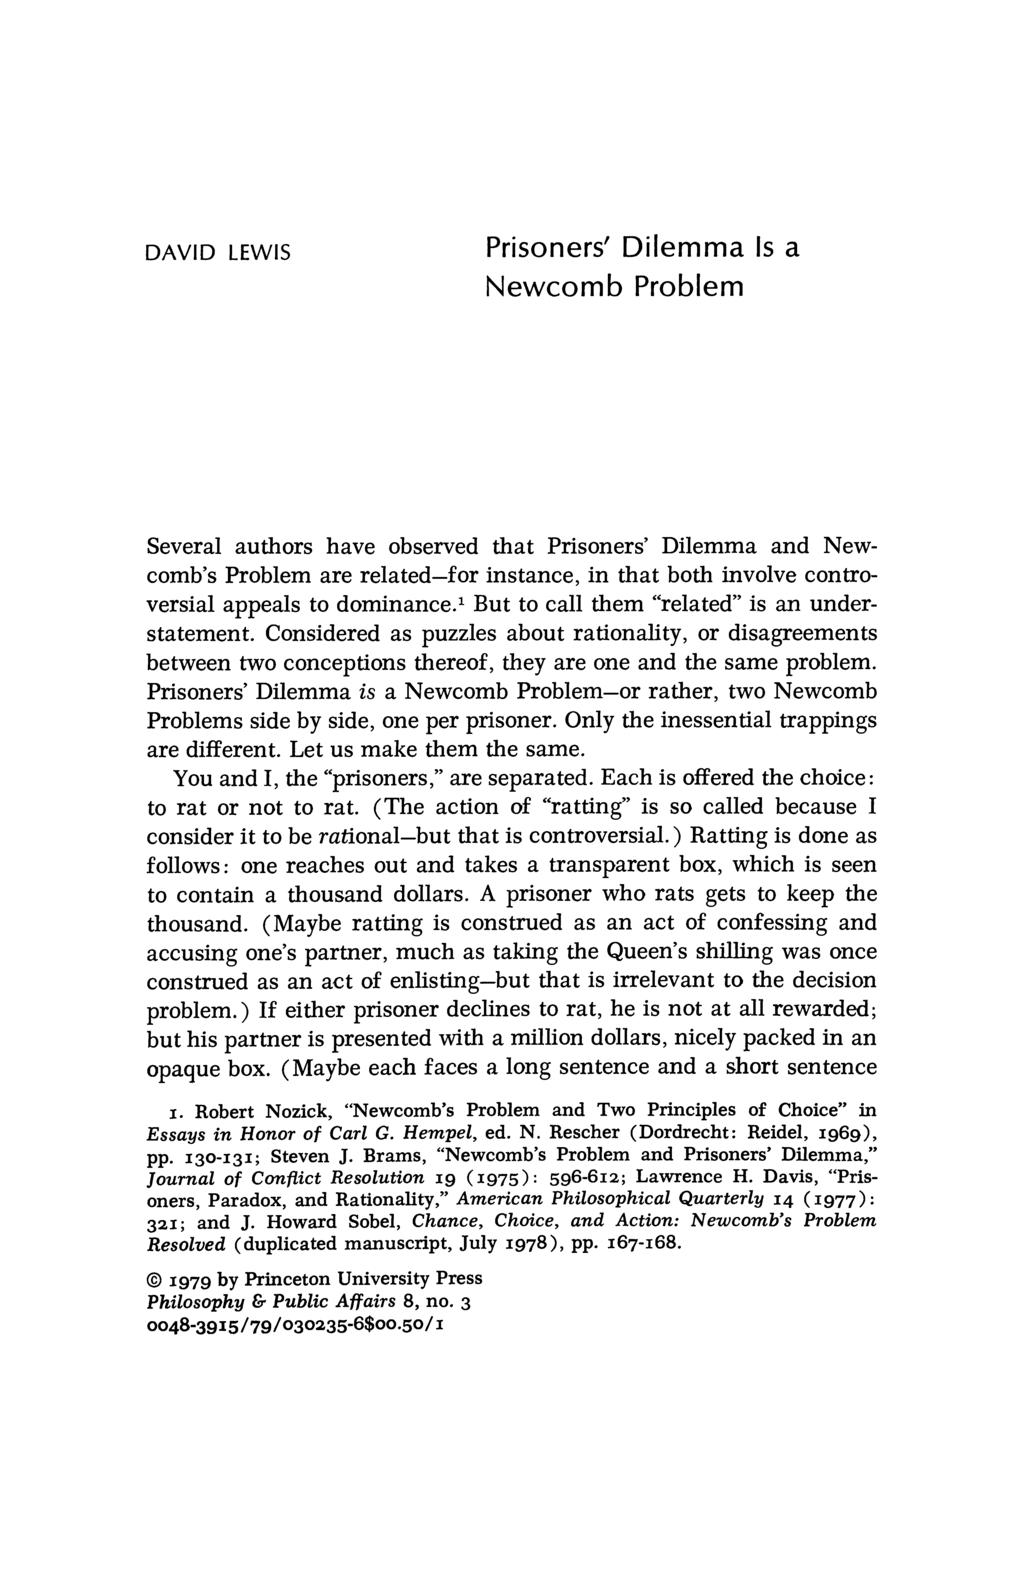 DAVID LEWIS Prisoners' Dilemma Is a Newcomb Problem Several authors have observed that Prisoners' Dilemma and Newcomb's Problem are related-for instance, in that both involve controversial appeals to